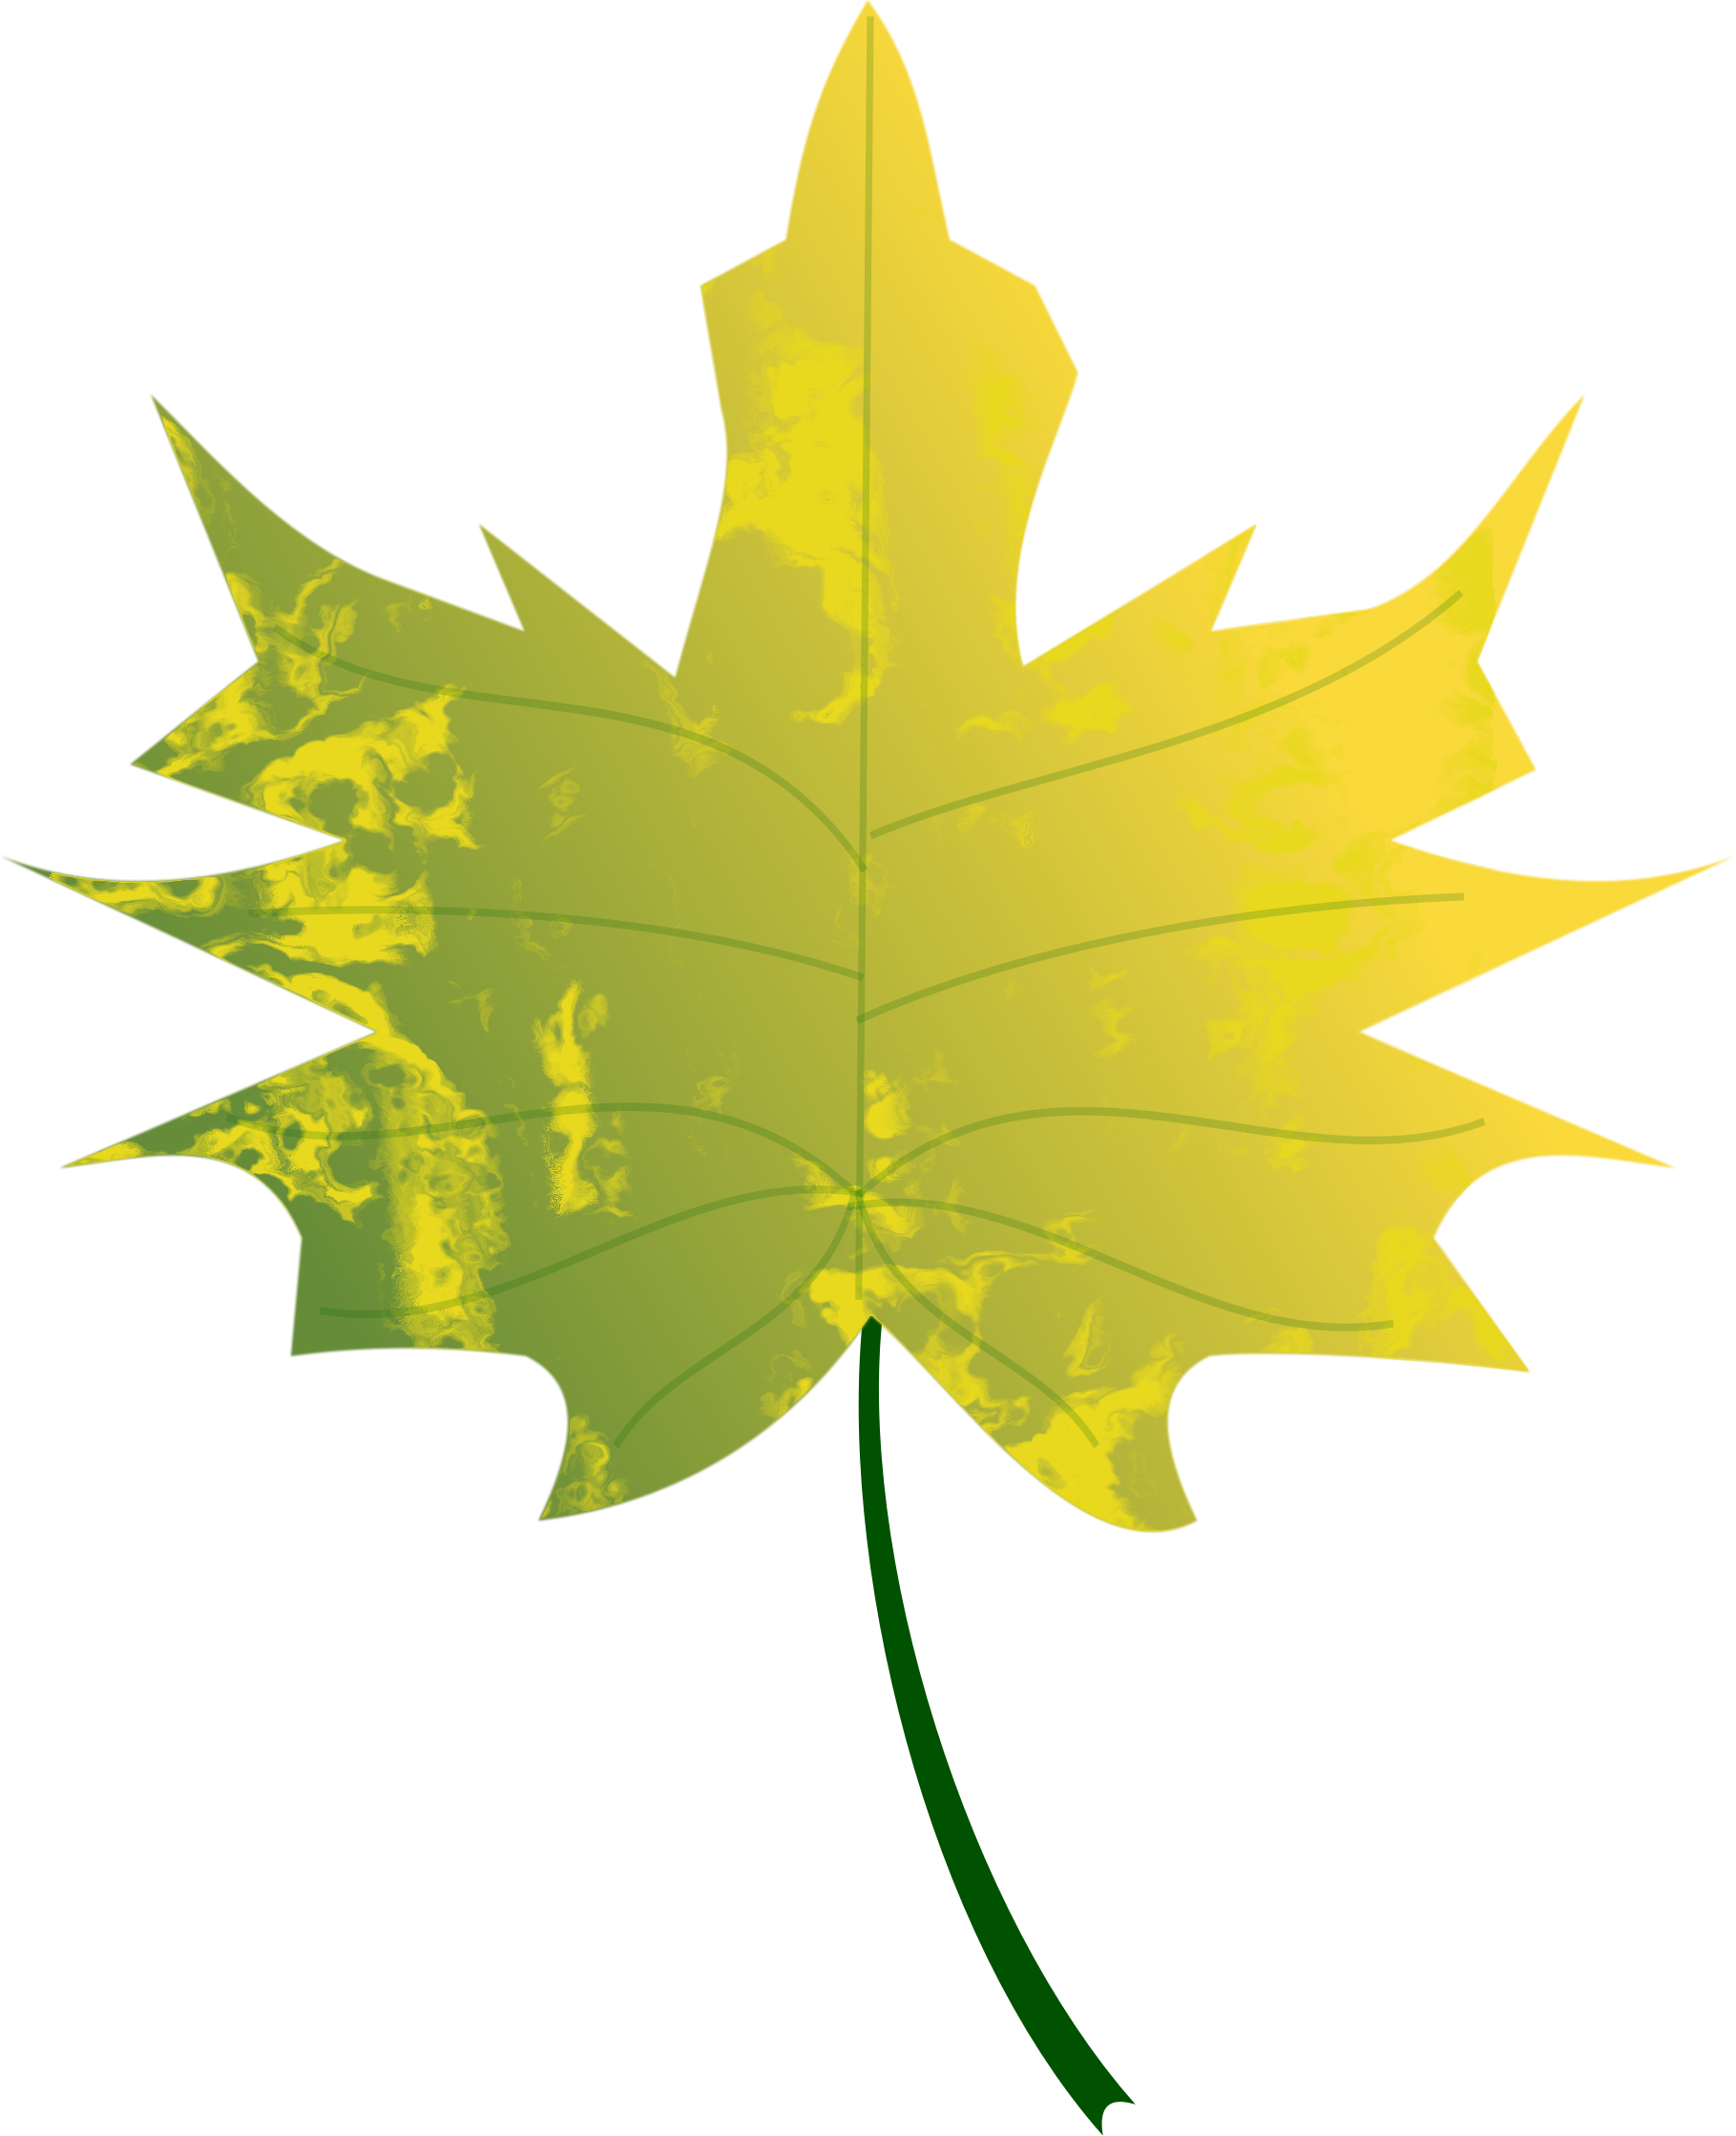 Falling Leaves Clipart 26, - Green And Yellow Leaf (610x750)